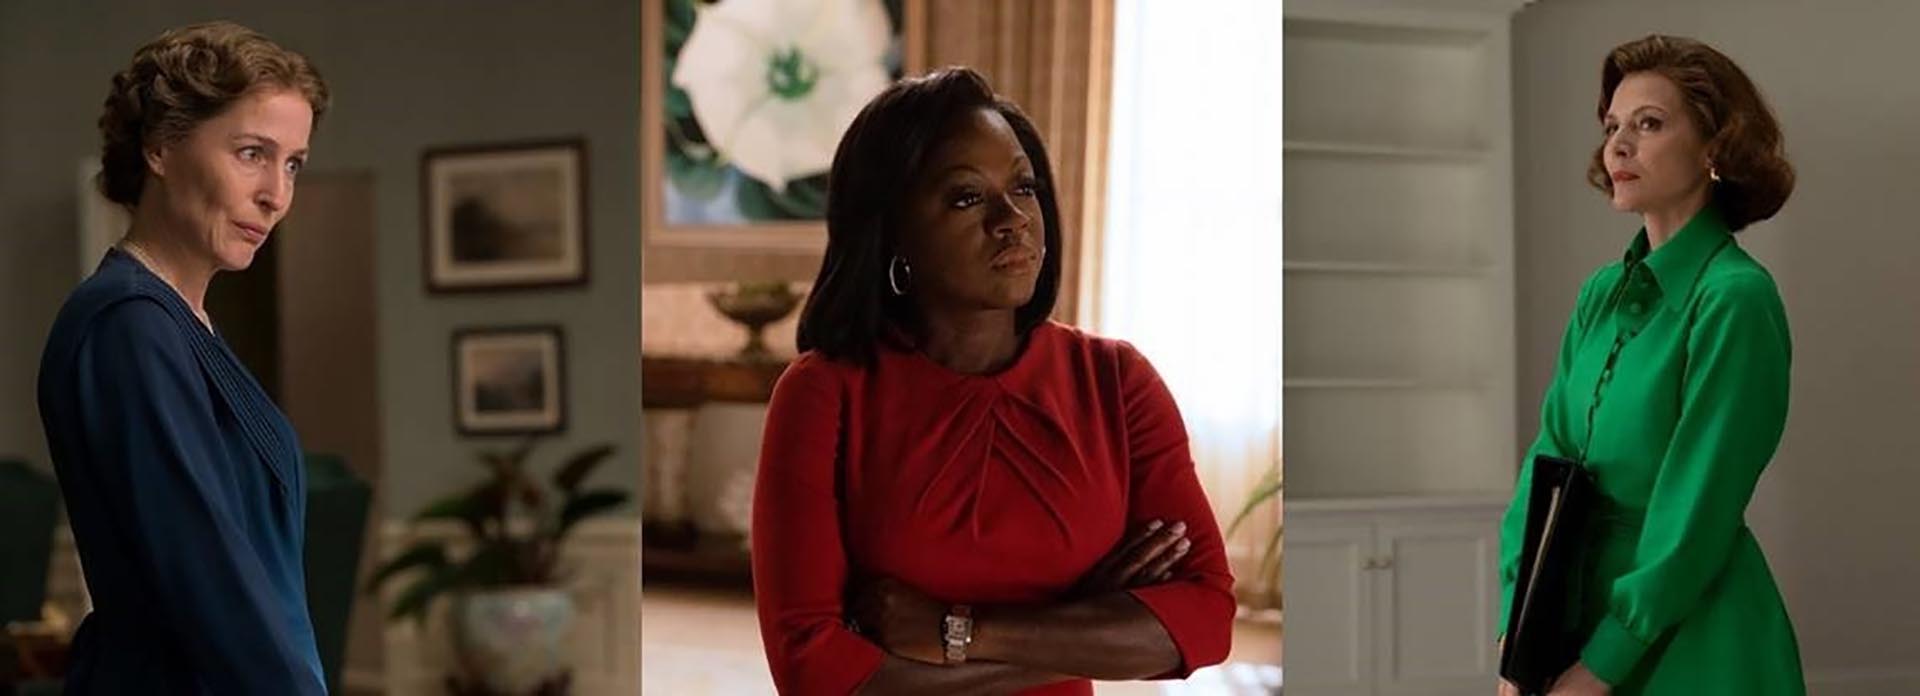 Gillian Anderson, Viola Davis and Michelle Pfeiffer bring Eleanor Roosevelt, Betty Ford and Michelle Obama to life in "The First Lady".  (Paramount+)